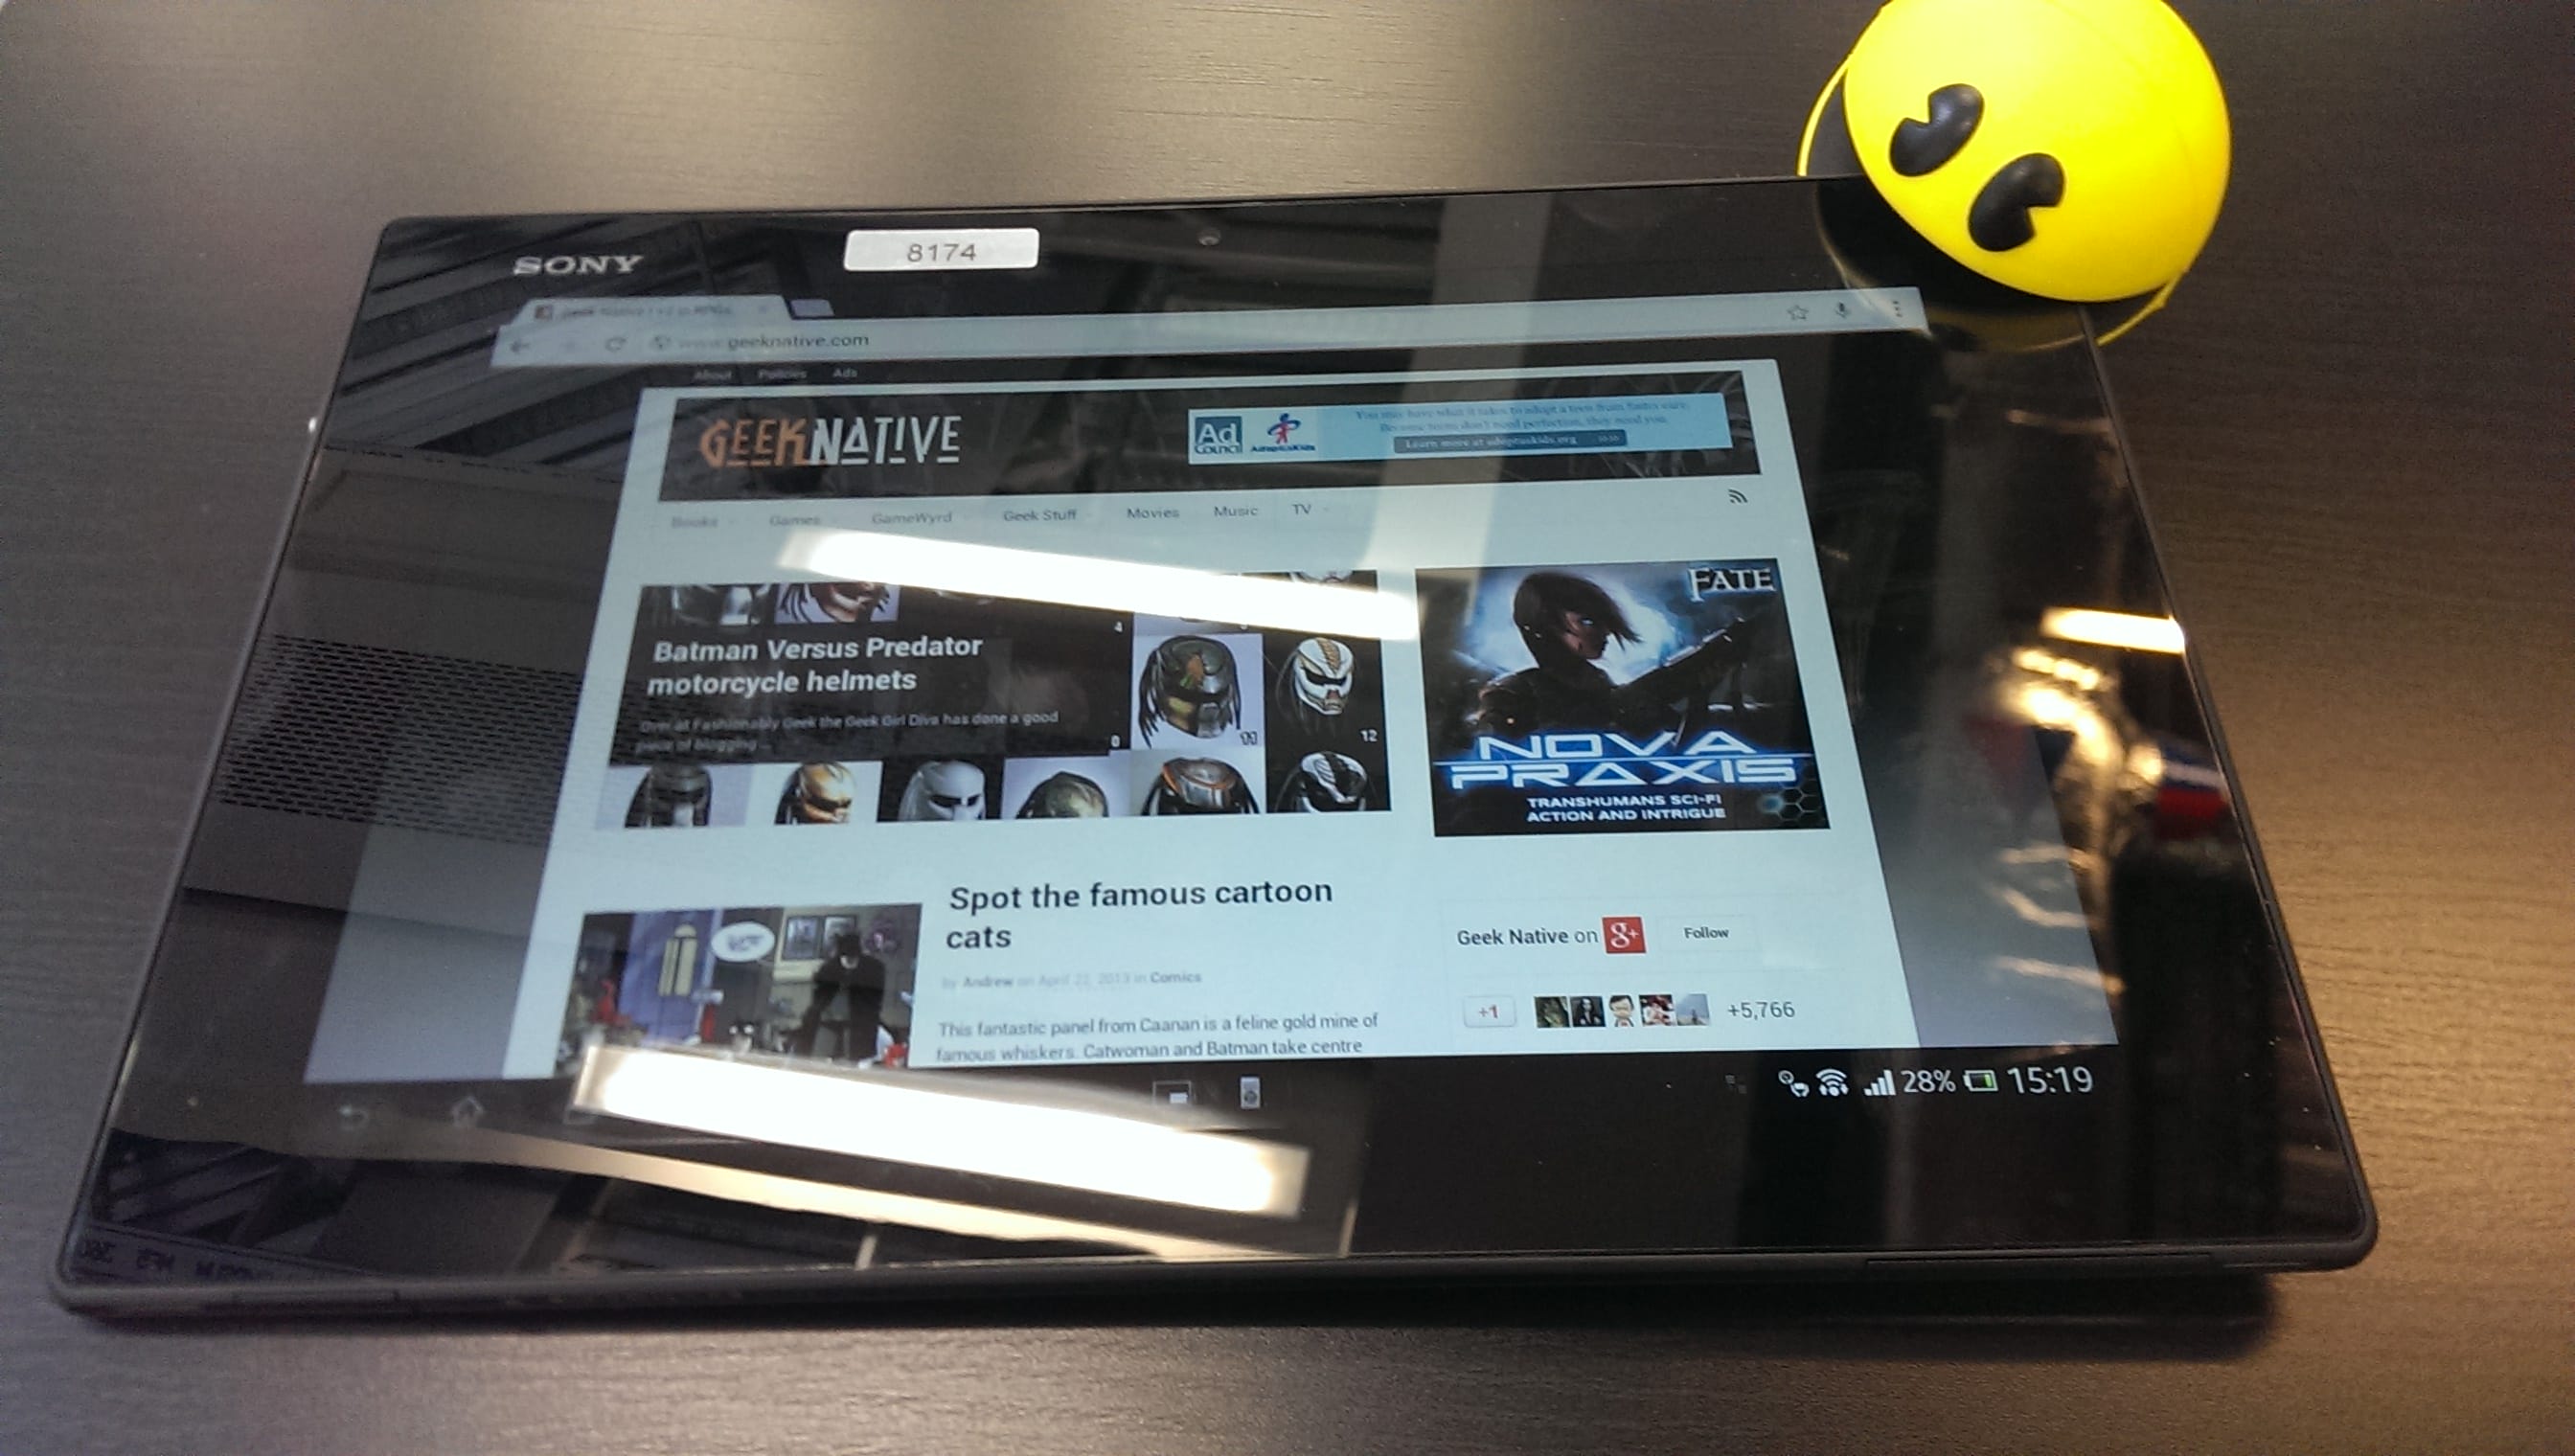 iview 10.1 tablet review